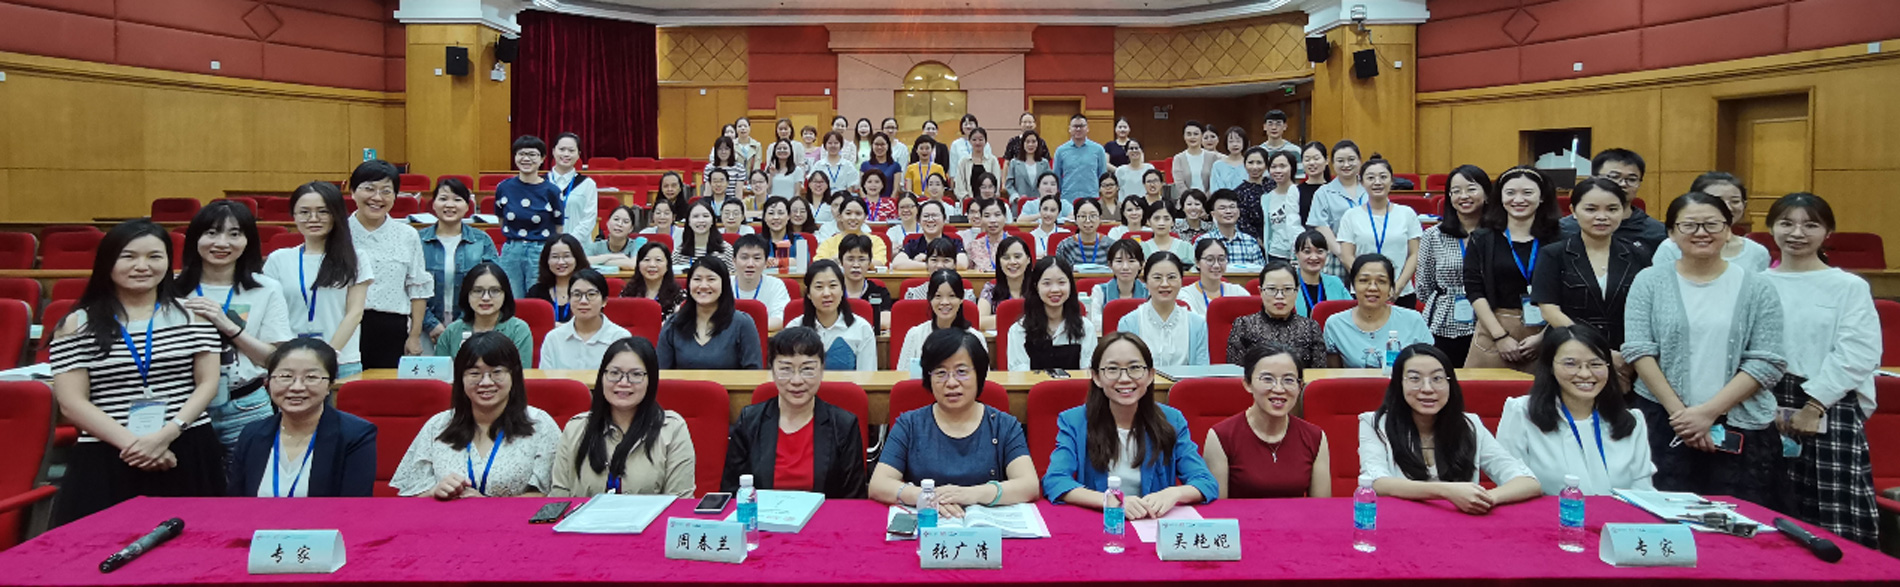 Participants in an EBP workshop at the Nanfang Nursing Centre of Evidence-based Practice: A JBI Centre of Excellence 